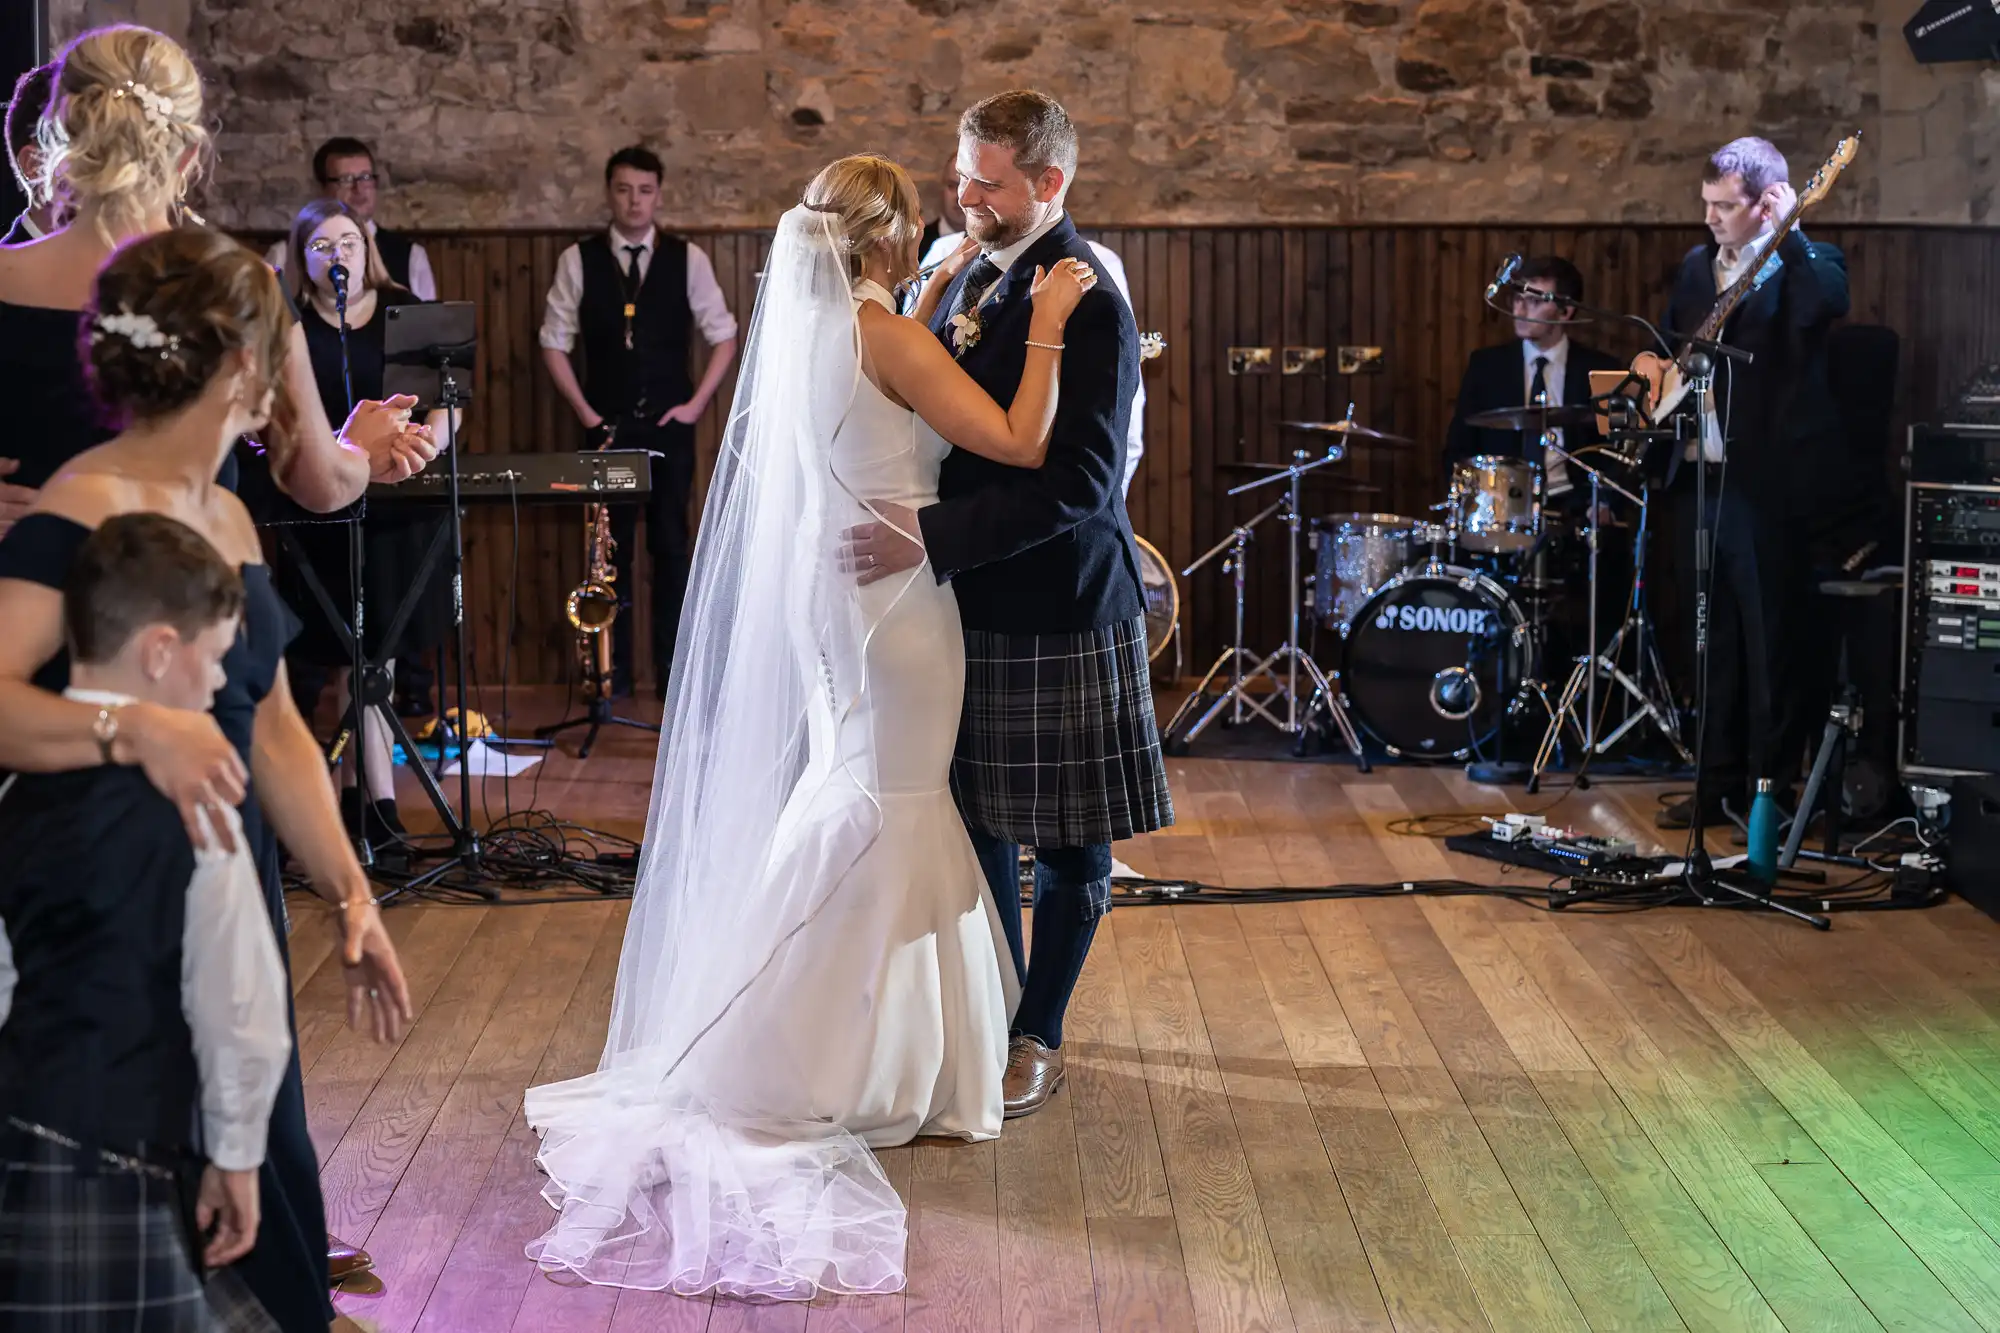 A bride and groom share their first dance in a hall with a live band and guests surrounding them. The groom wears a kilt, and the bride is in a white dress.